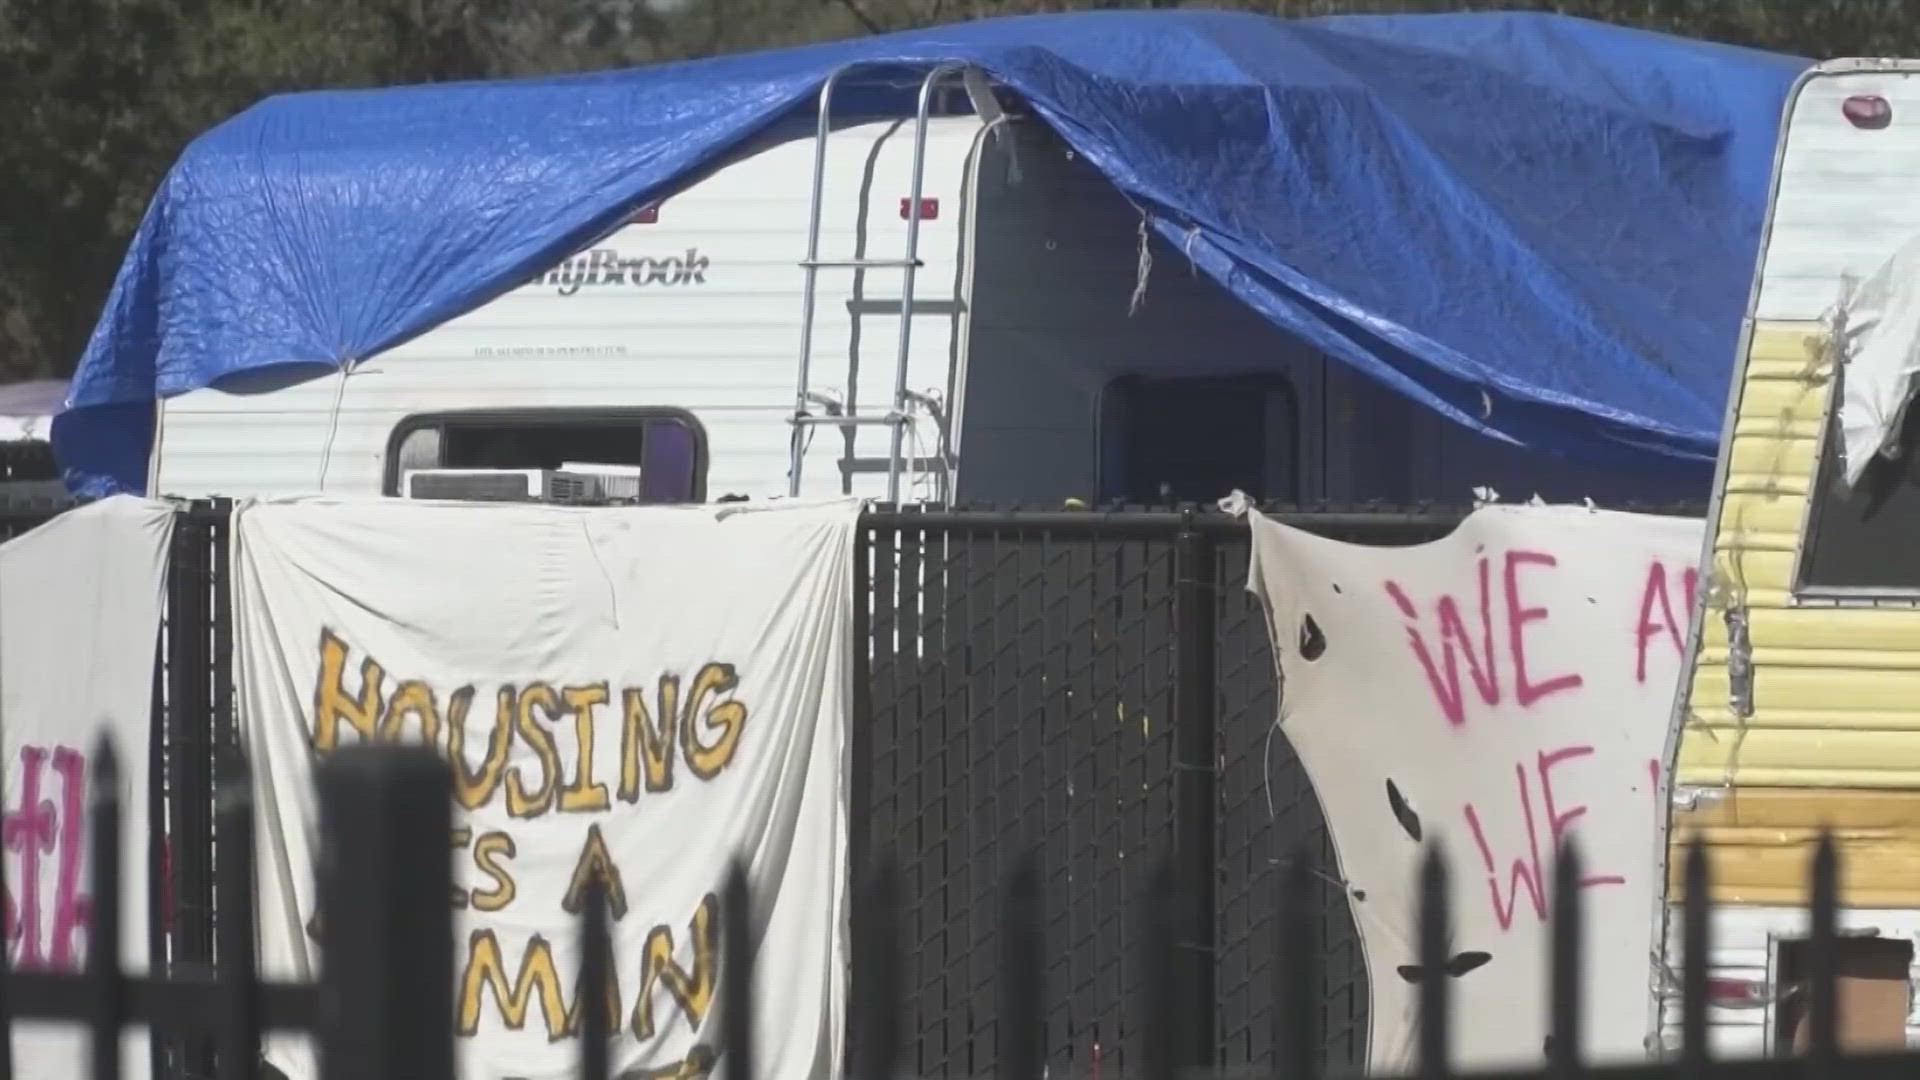 Residents at Sacramento's Camp Resolution worried about what comes next